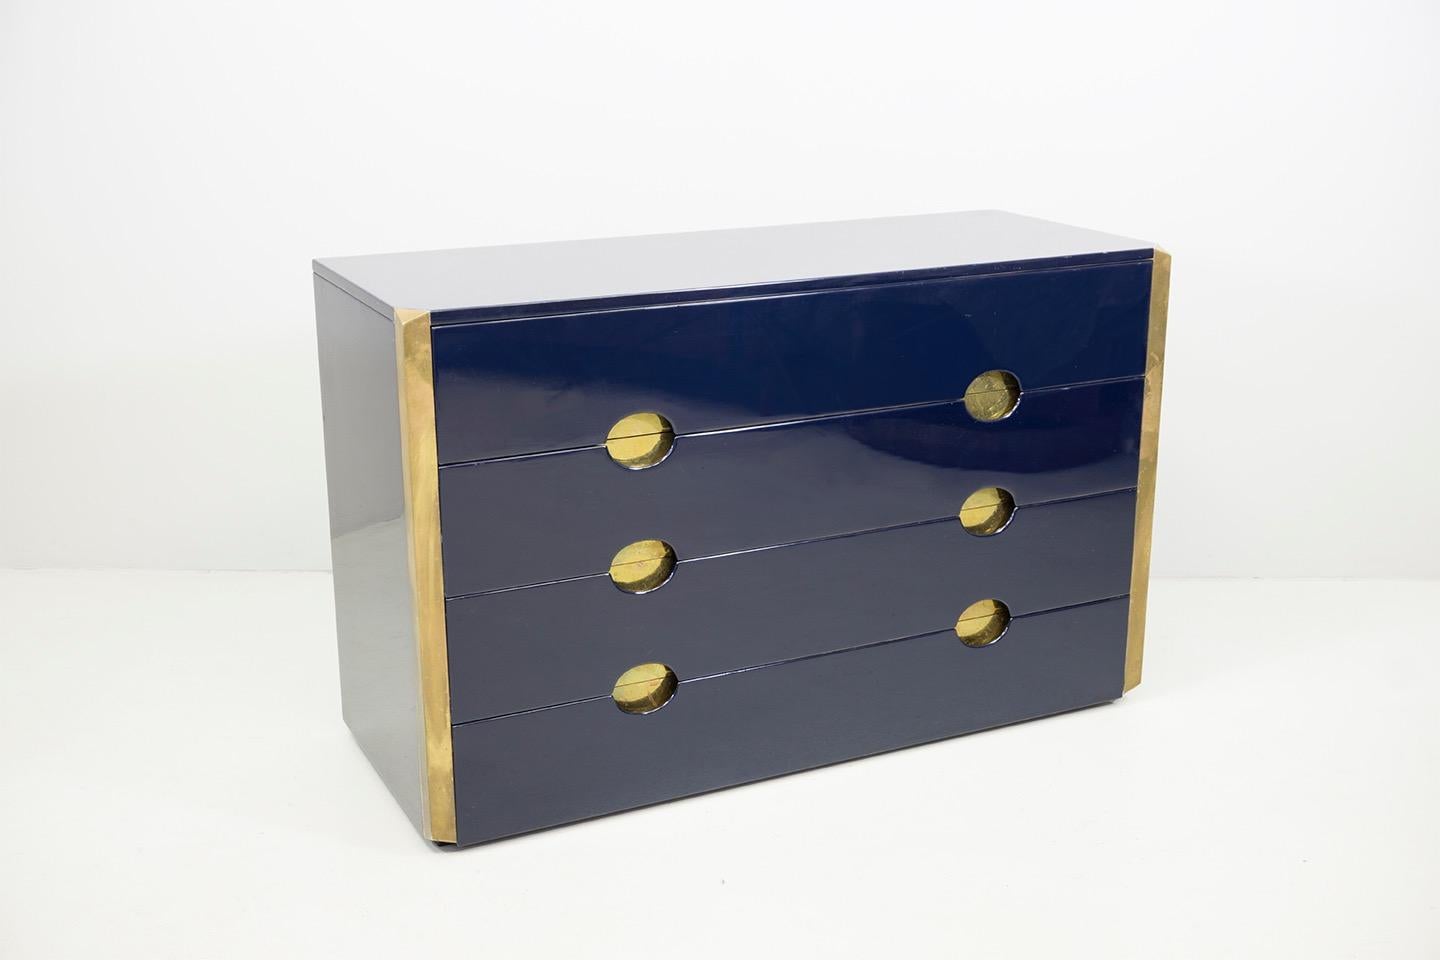 Elegant sIdeboard with three spacious drawers, wooden corpus with a glossy lacquered surface in dark blue and brass elements. 
Designed by Dominioni, manufactured by Azucena.